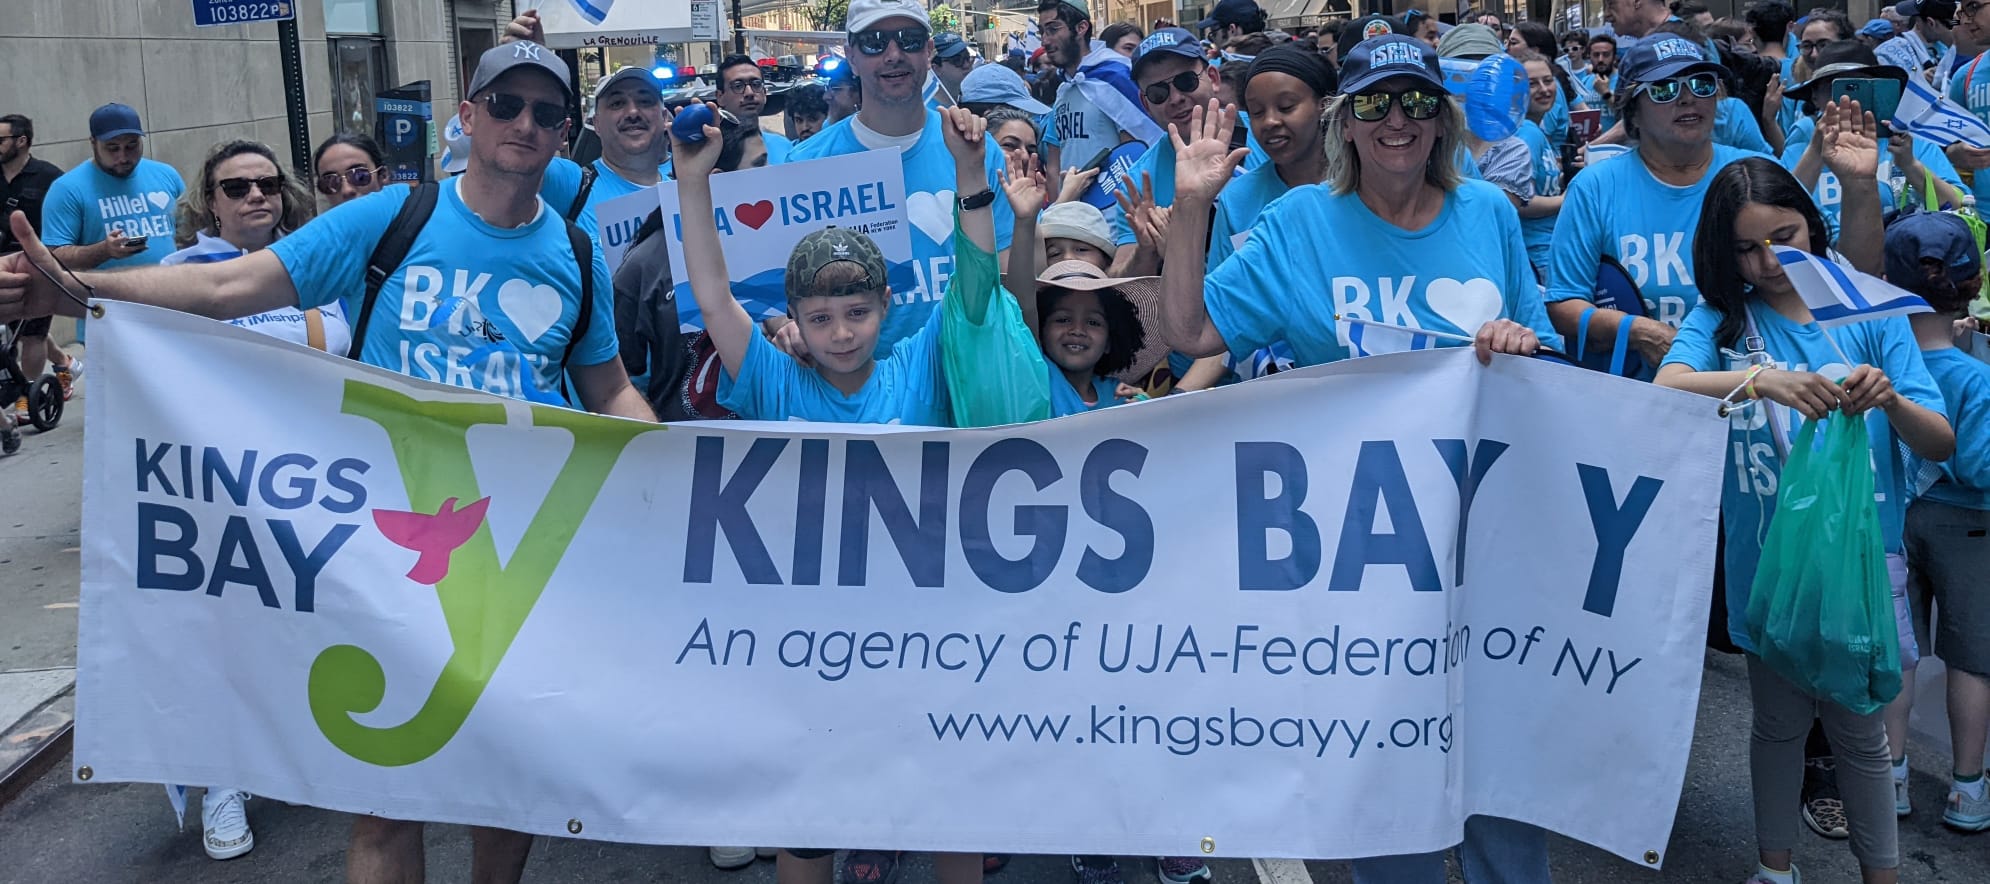 Israel Day Parade on 5th Avenue! Kings Bay Y